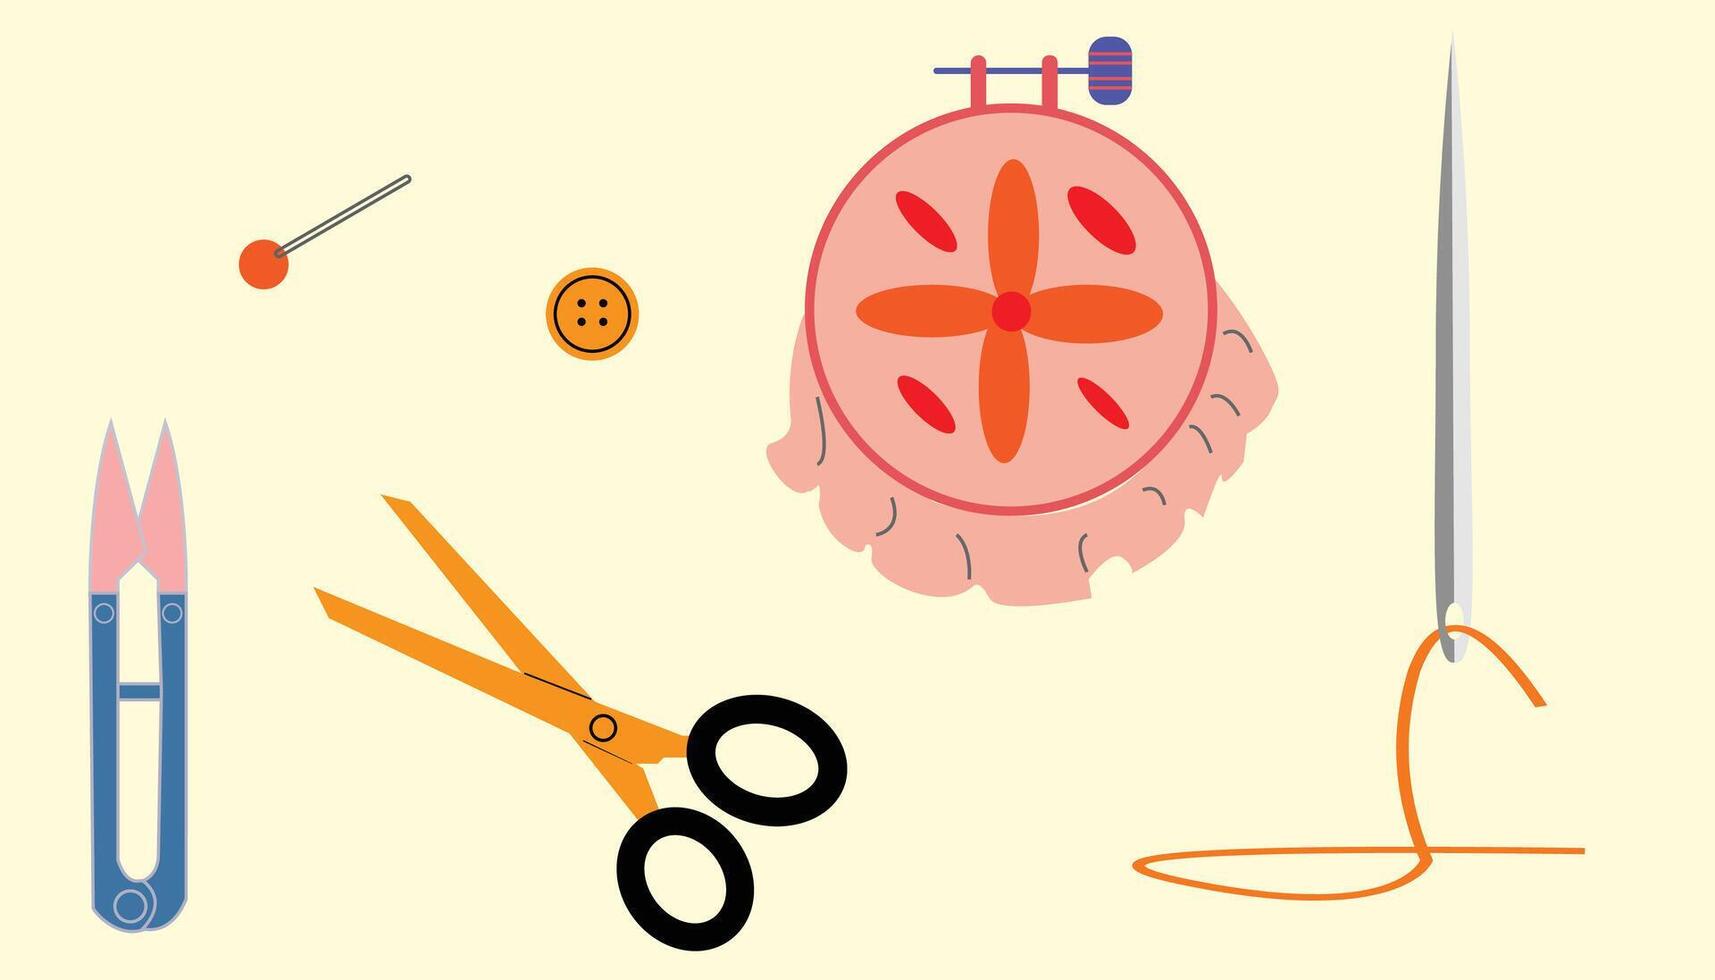 Sewing Related Cartoon Style Doodle Illustration vector